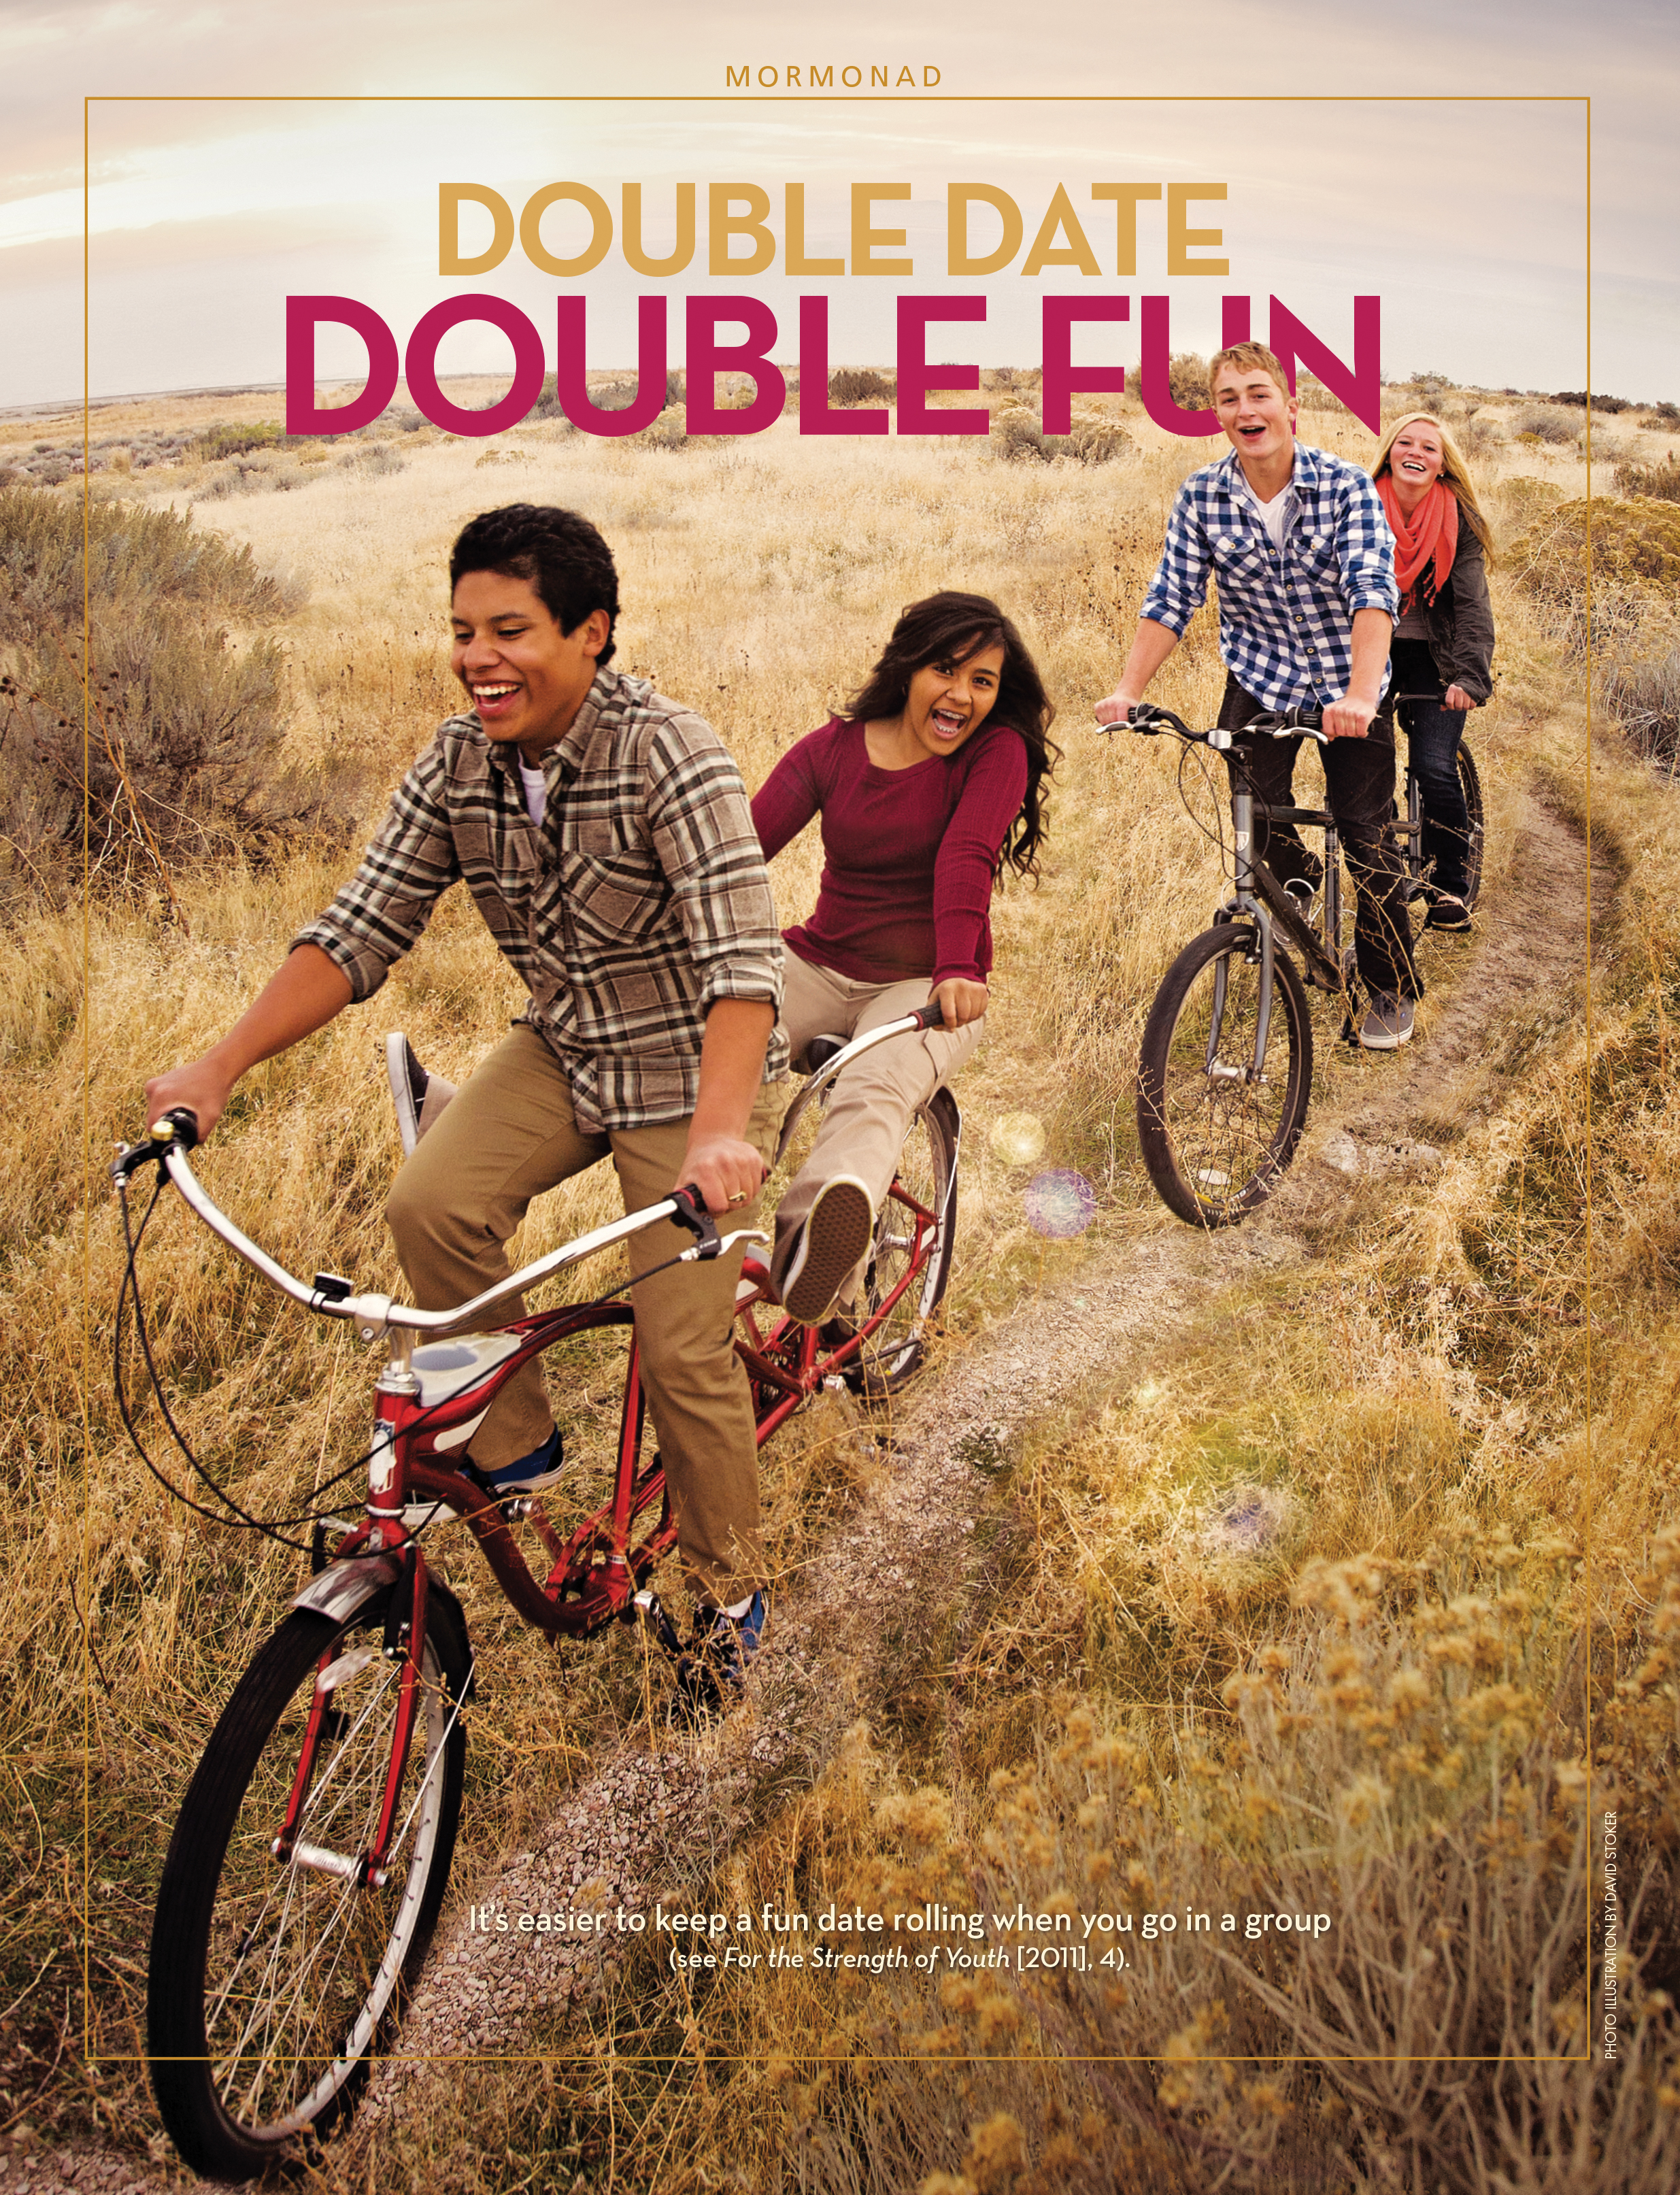 A poster showing two couples on tandem bikes, paired with the words “Double Date, Double Fun.”